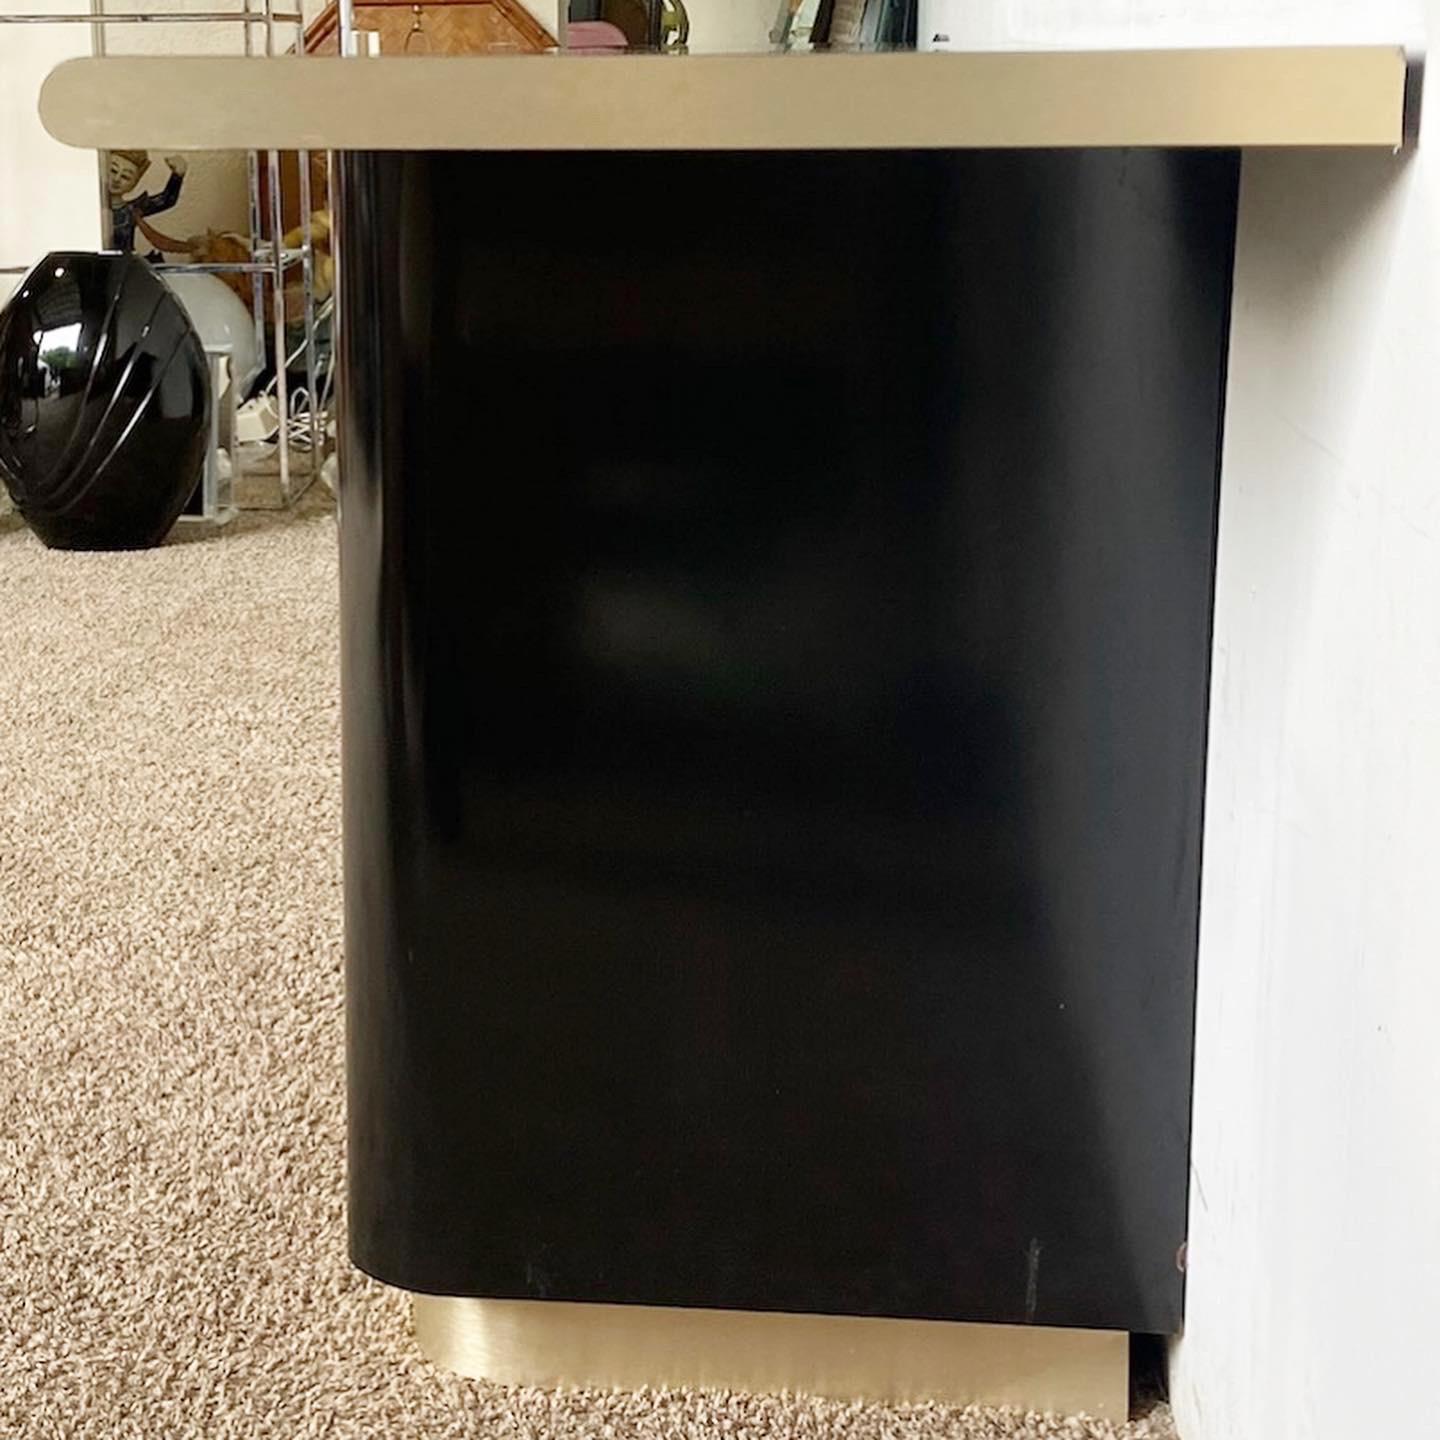 Discover modern elegance with this Black Lacquer Gold T-Shaped Credenza. Featuring a high-gloss black lacquer finish and brushed gold details, it marries style with functionality.
Minor wear and chips around the edges as seen in the photos.